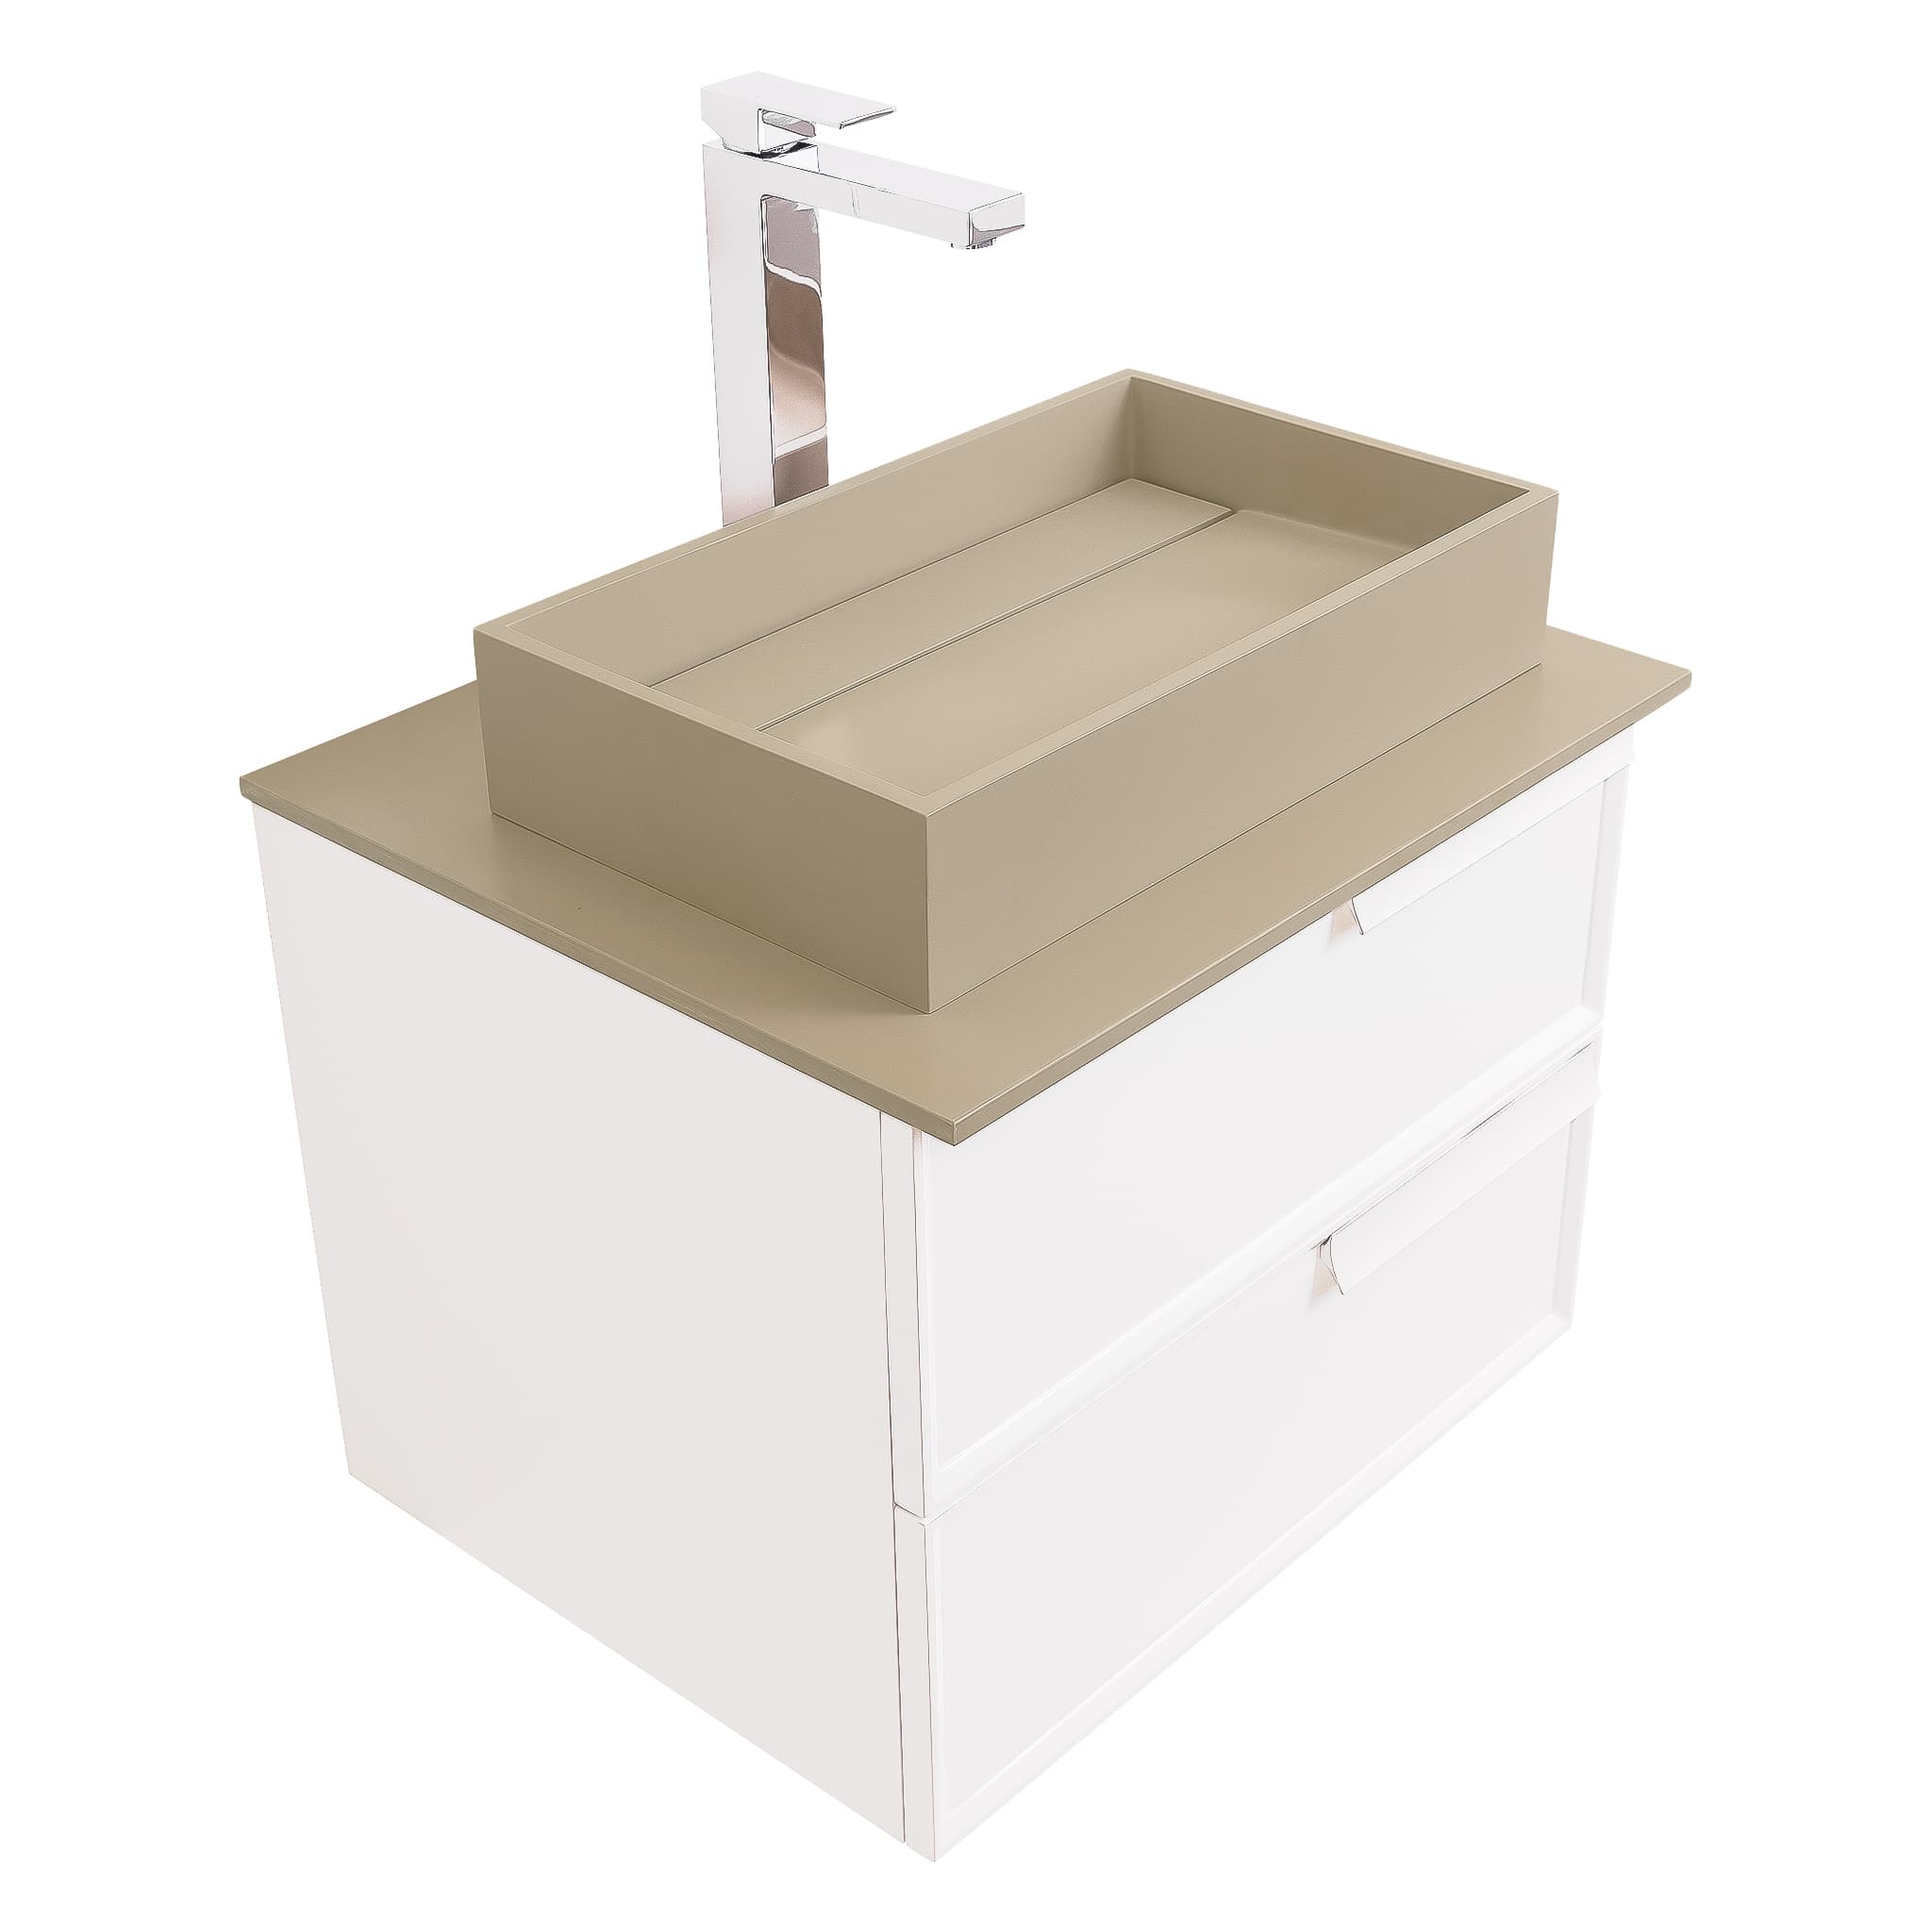 Garda 23.5 Matte White Cabinet, Solid Surface Flat Taupe Counter and Infinity Square Solid Surface Taupe Basin 1329, Wall Mounted Modern Vanity Set